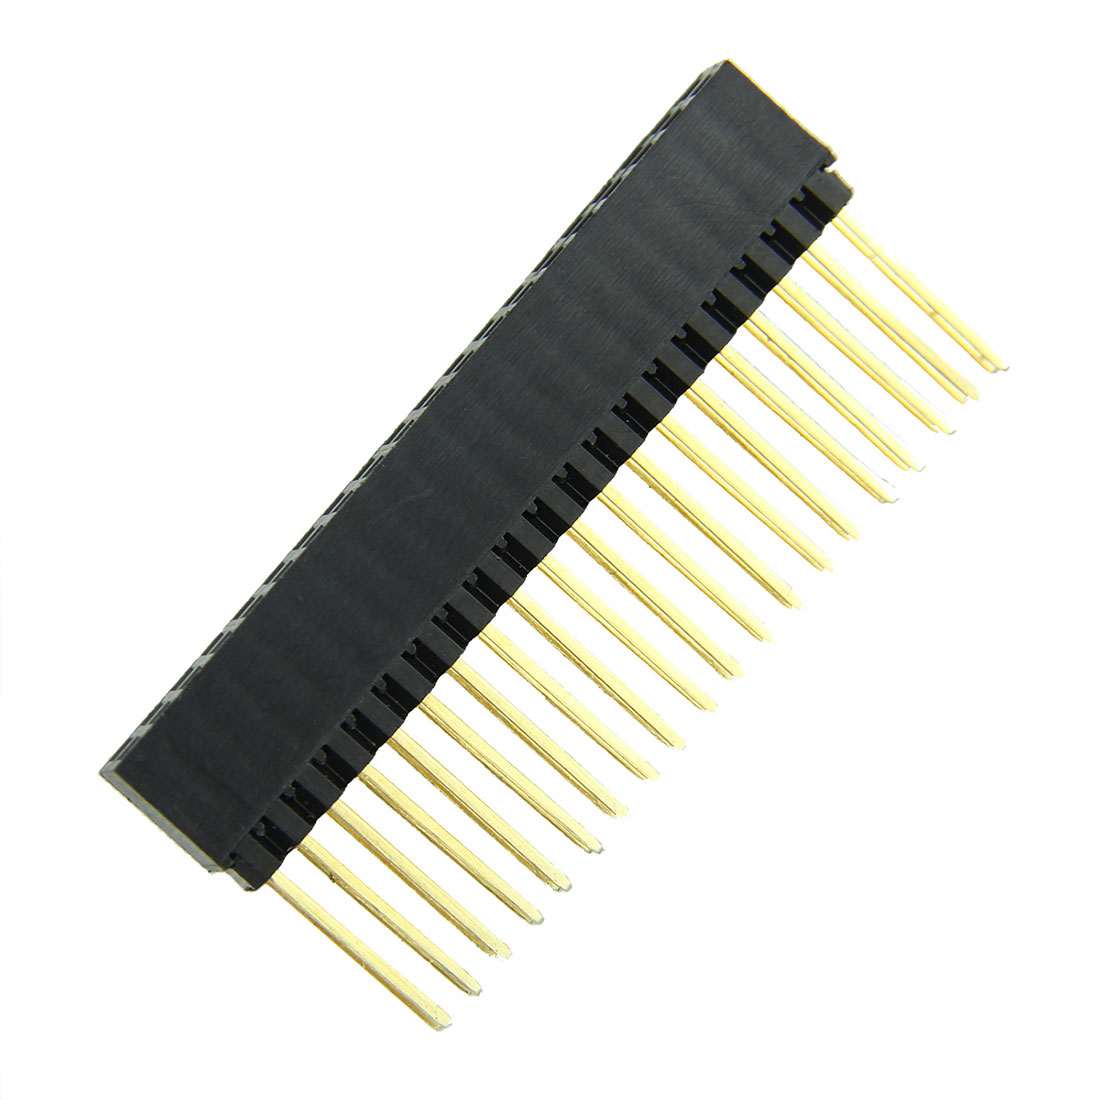 Connector 40Pin 12mm Female Stacking Header Module for Raspberry Pi B & B